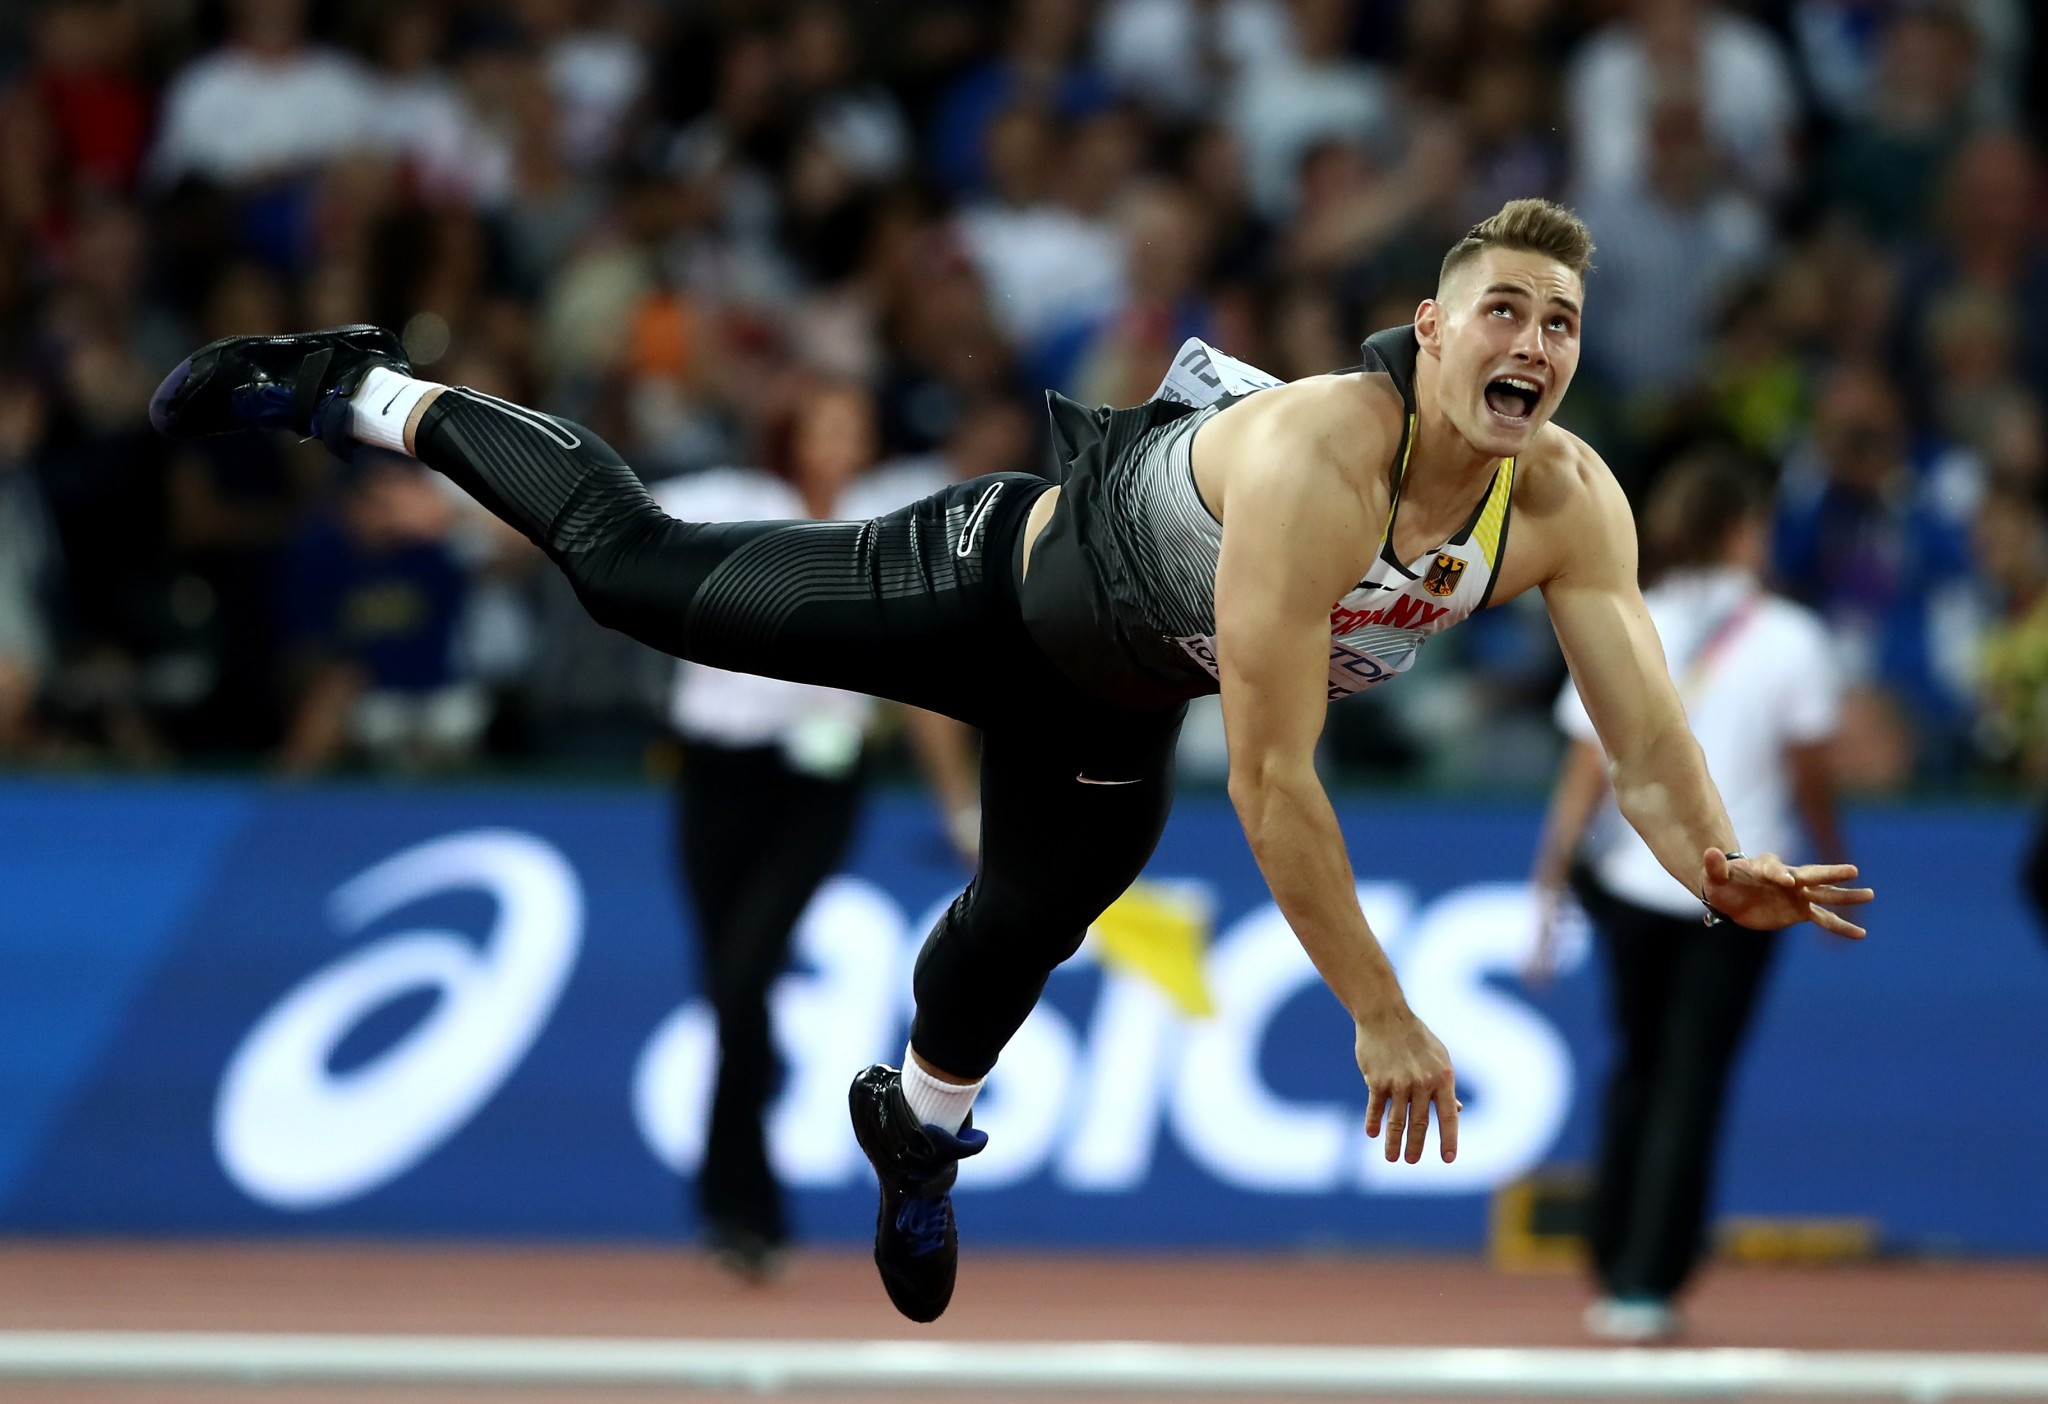 Germany's Johannes Vetter topped the podium in the men's javelin competition